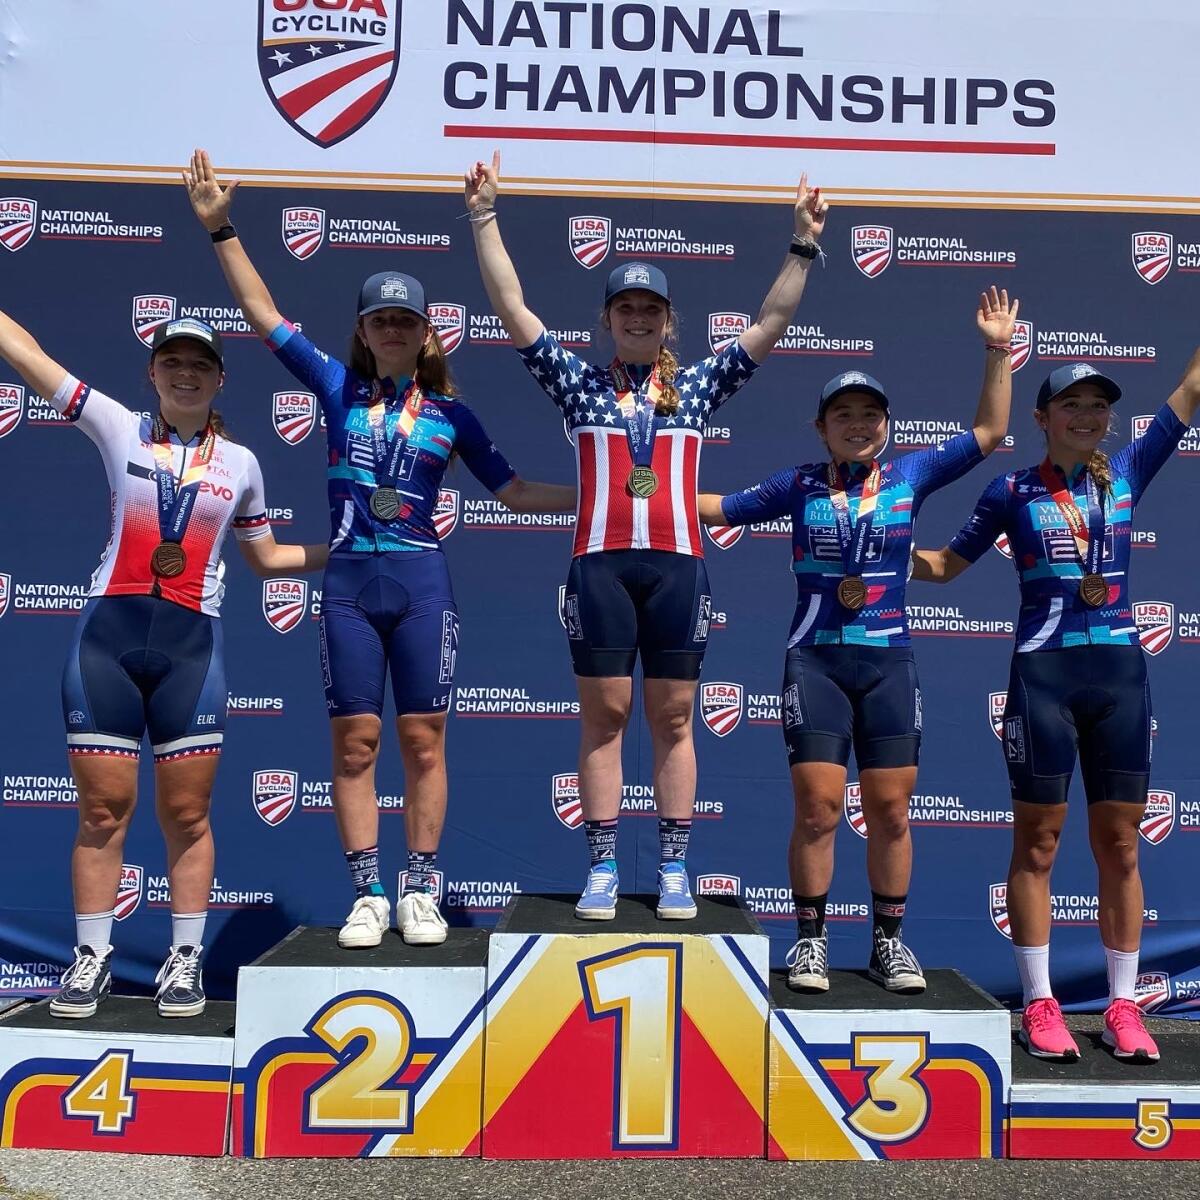 Eire Chen was third at the USA Cycling Nationals.